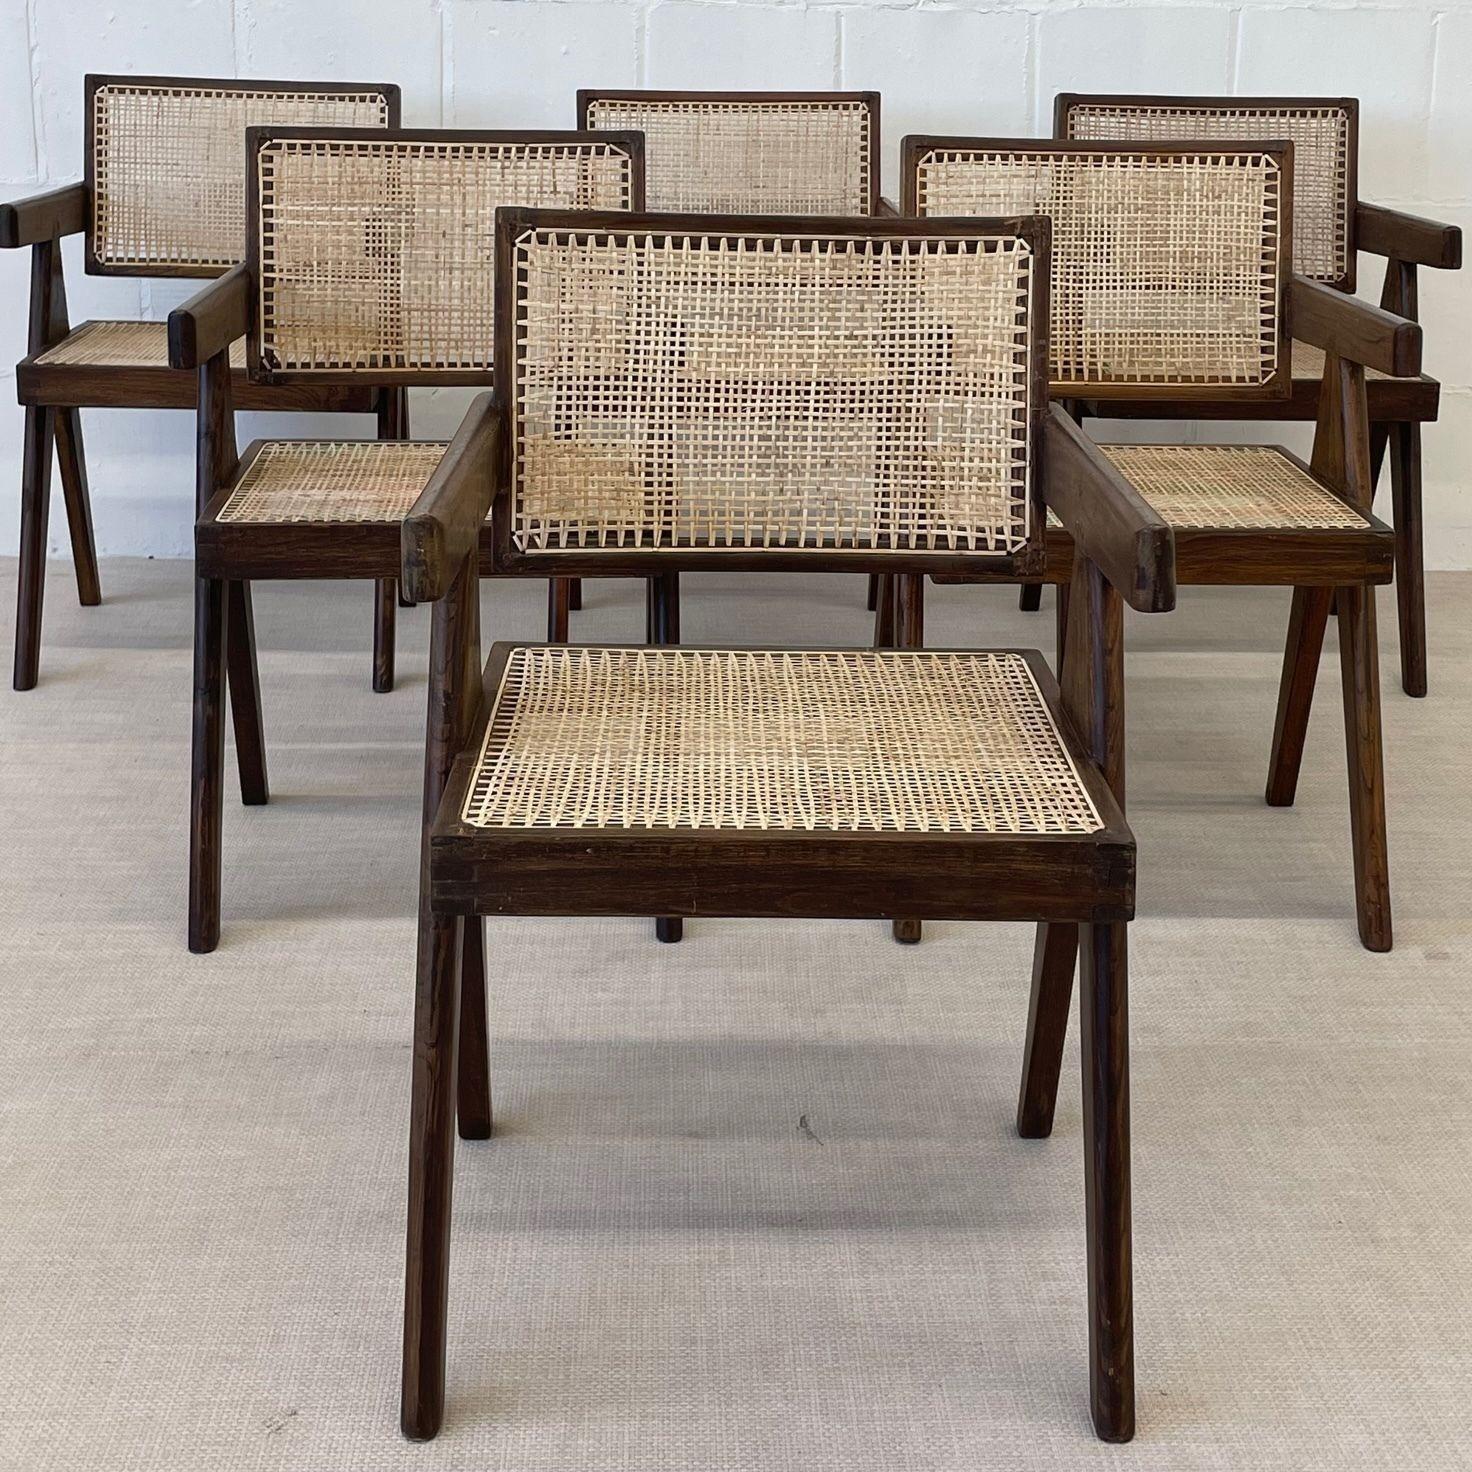 Pierre Jeanneret Floating Back Chairs, Teak, Cane, Set of 6, PJ-SI-28-A, 1950s These chairs have been lightly washed and polished. The cane has been re-done by hand in India. These are authentic and directly from Chandigarh, India. The wear to the